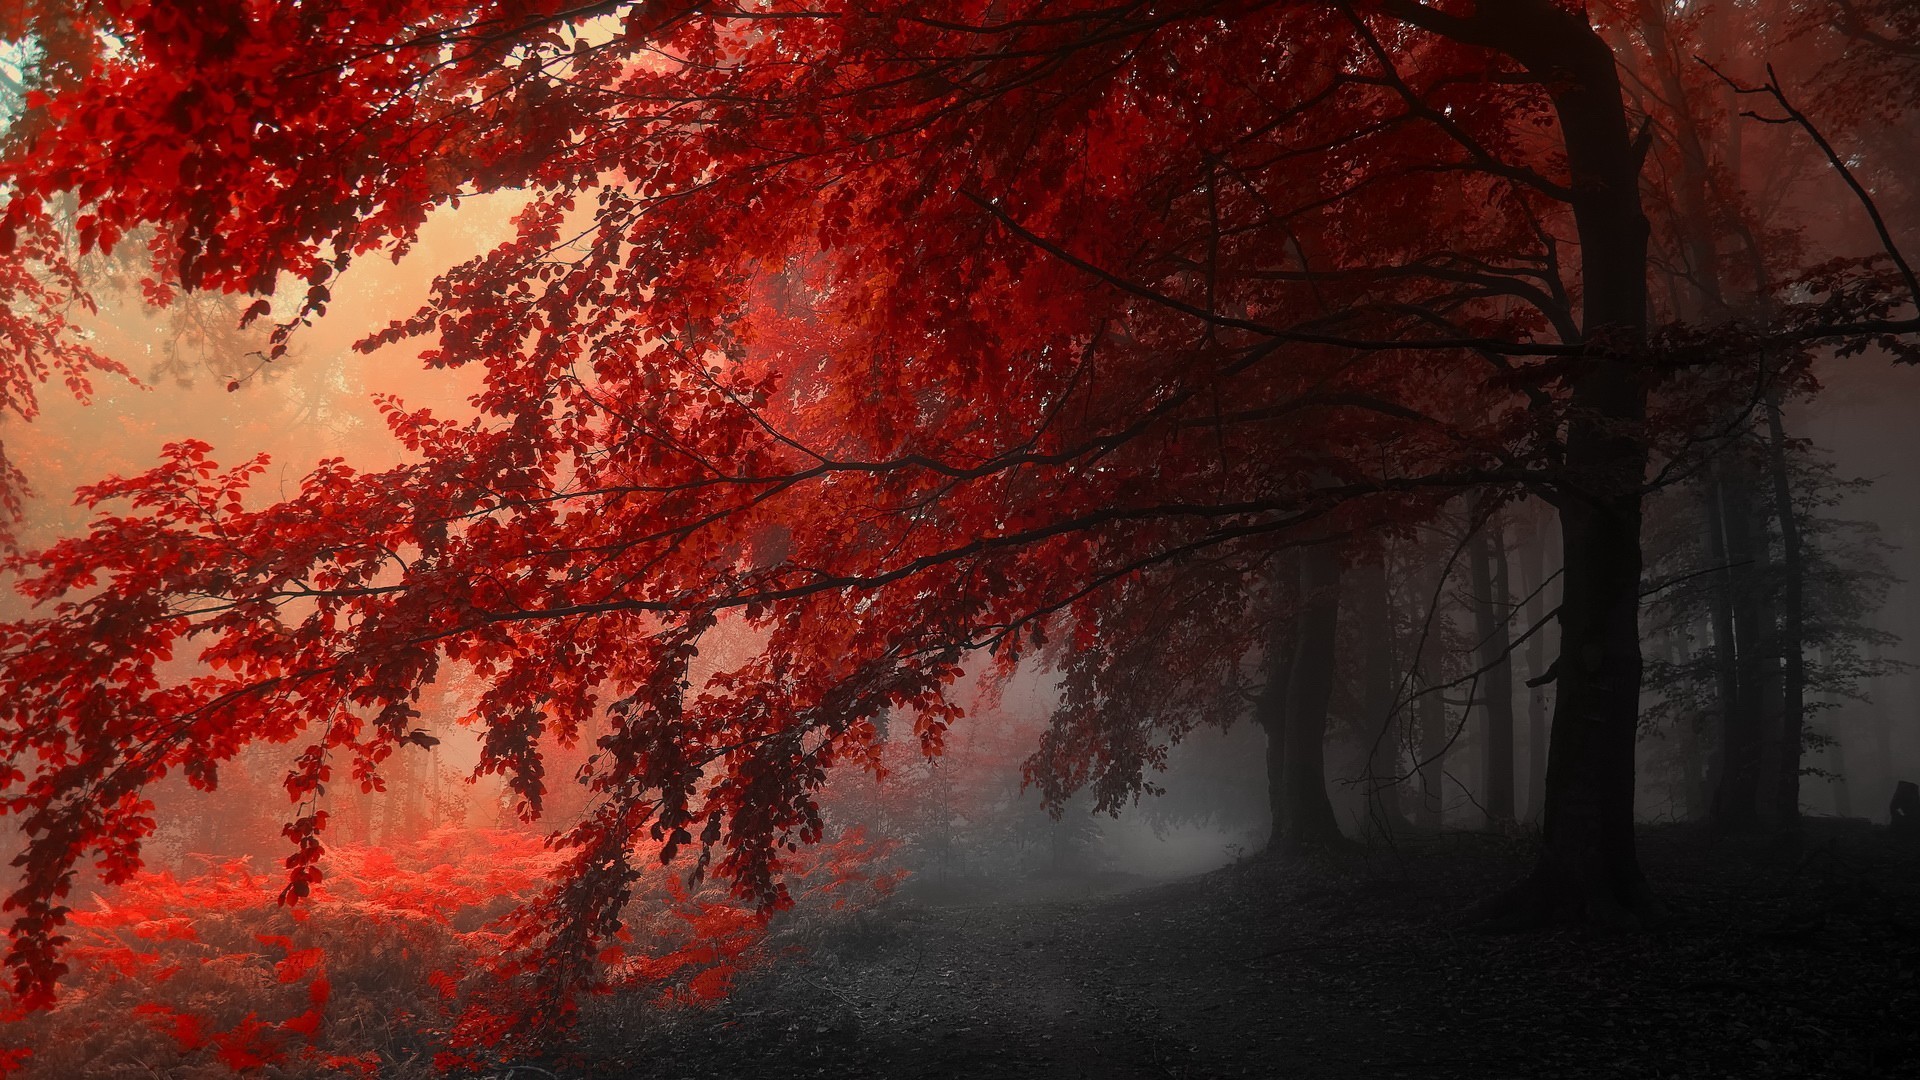 General 1920x1080 fall mist red nature trees plants outdoors